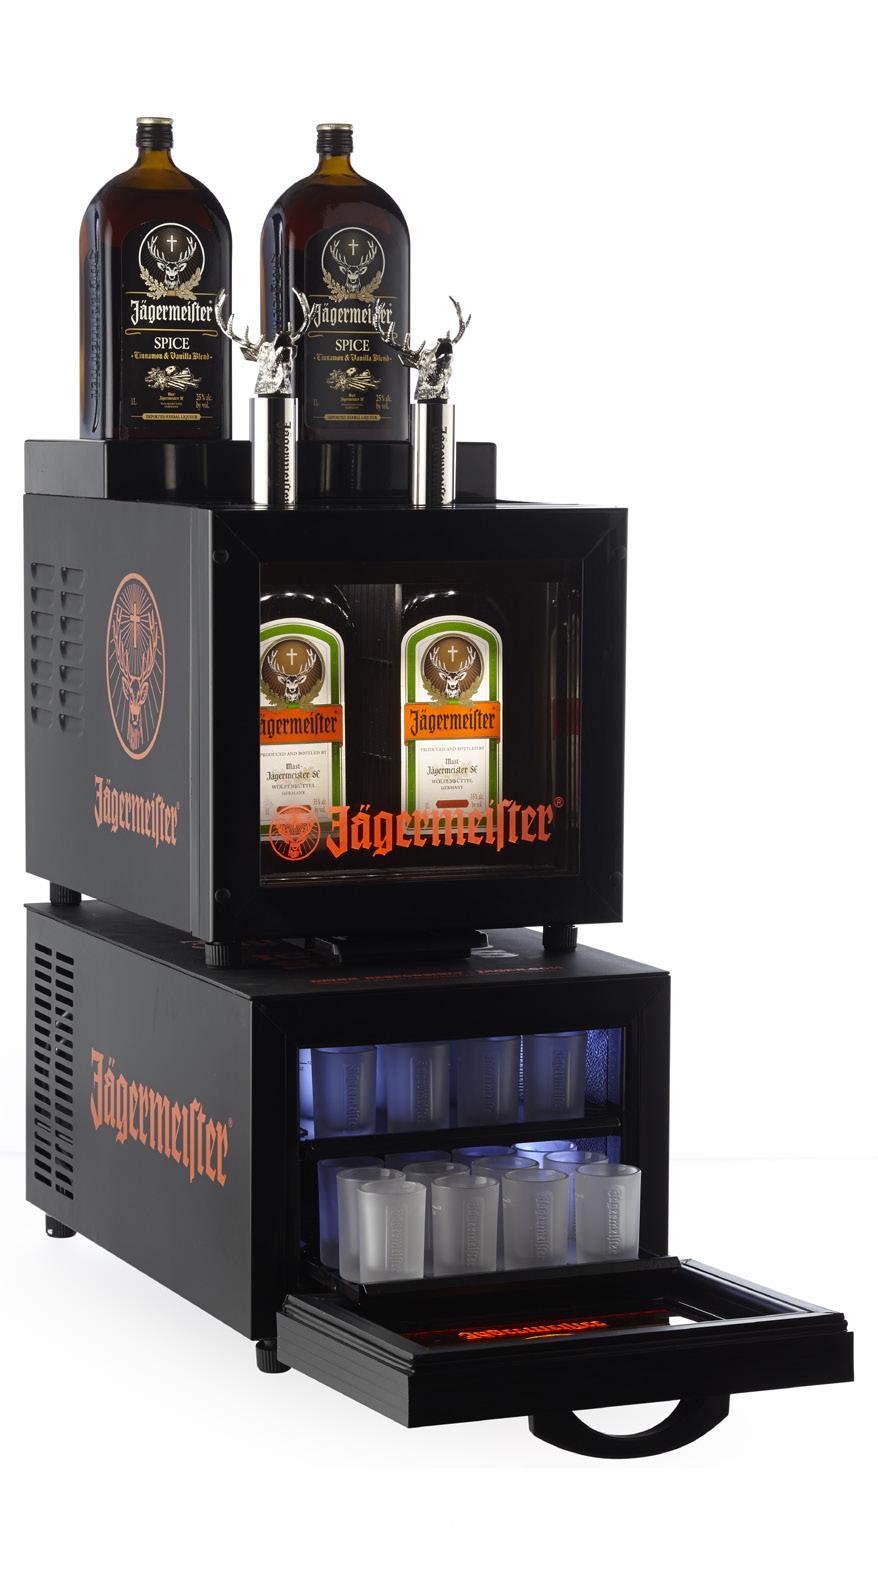 The Jägermeister Speed Pour may be placed on top of the